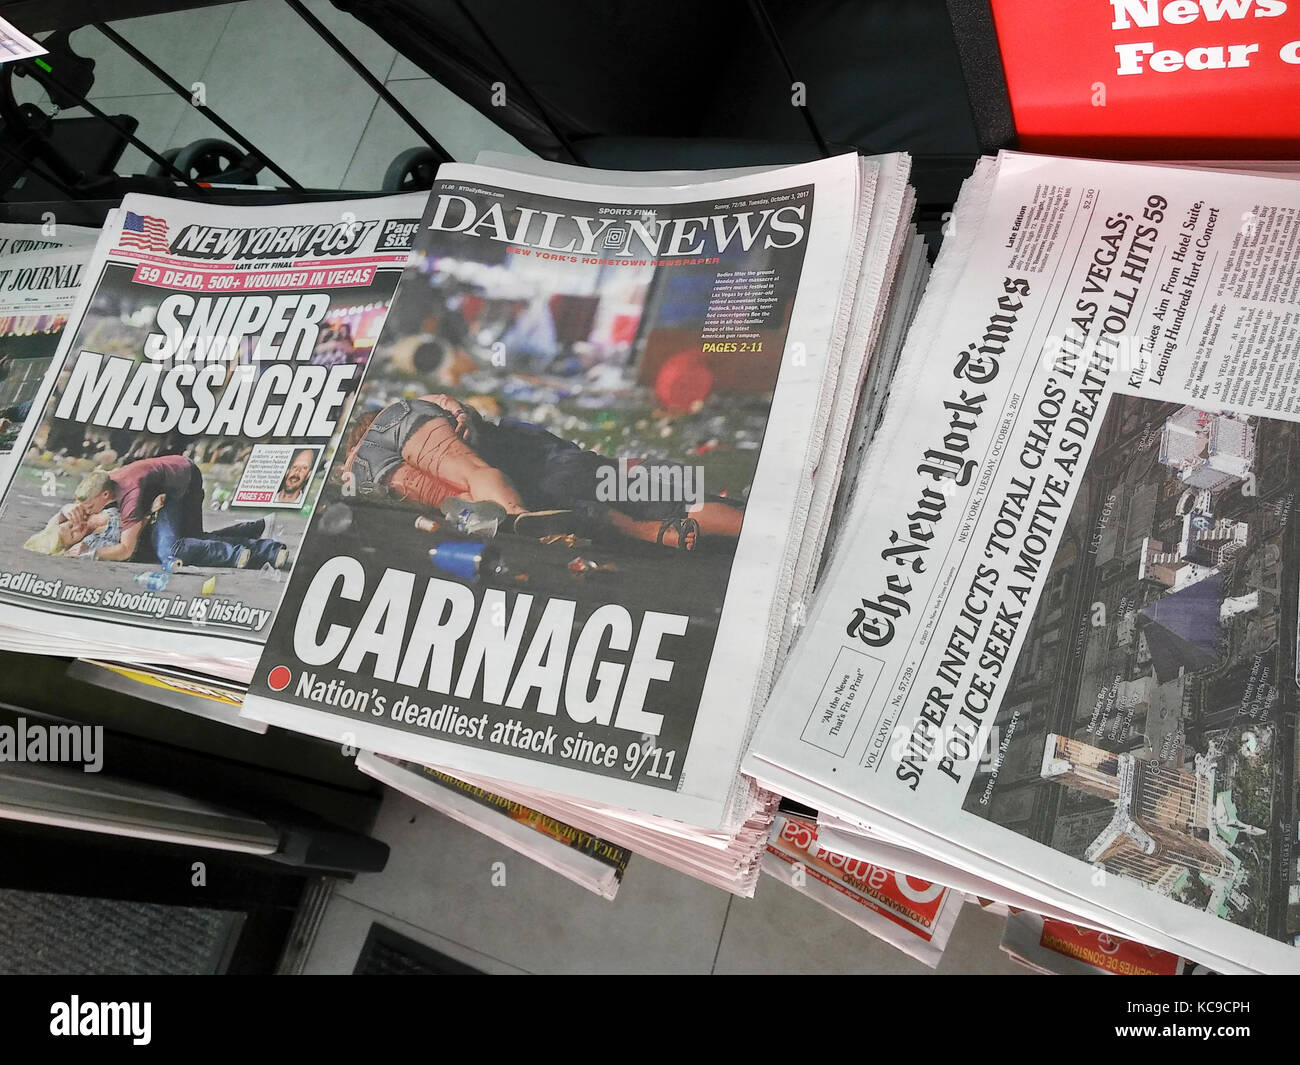 Front pages of New York newspapers on Tuesday, October 3, 2017 report on the shooting by Stephen Paddock in Las Vegas from his room at the Mandalay Bay hotel during a country music concert which resulted in 59 fatalities so far and 527 injured.  The shooting was the worst mass murder in US history. (© Richard B. Levine) Stock Photo